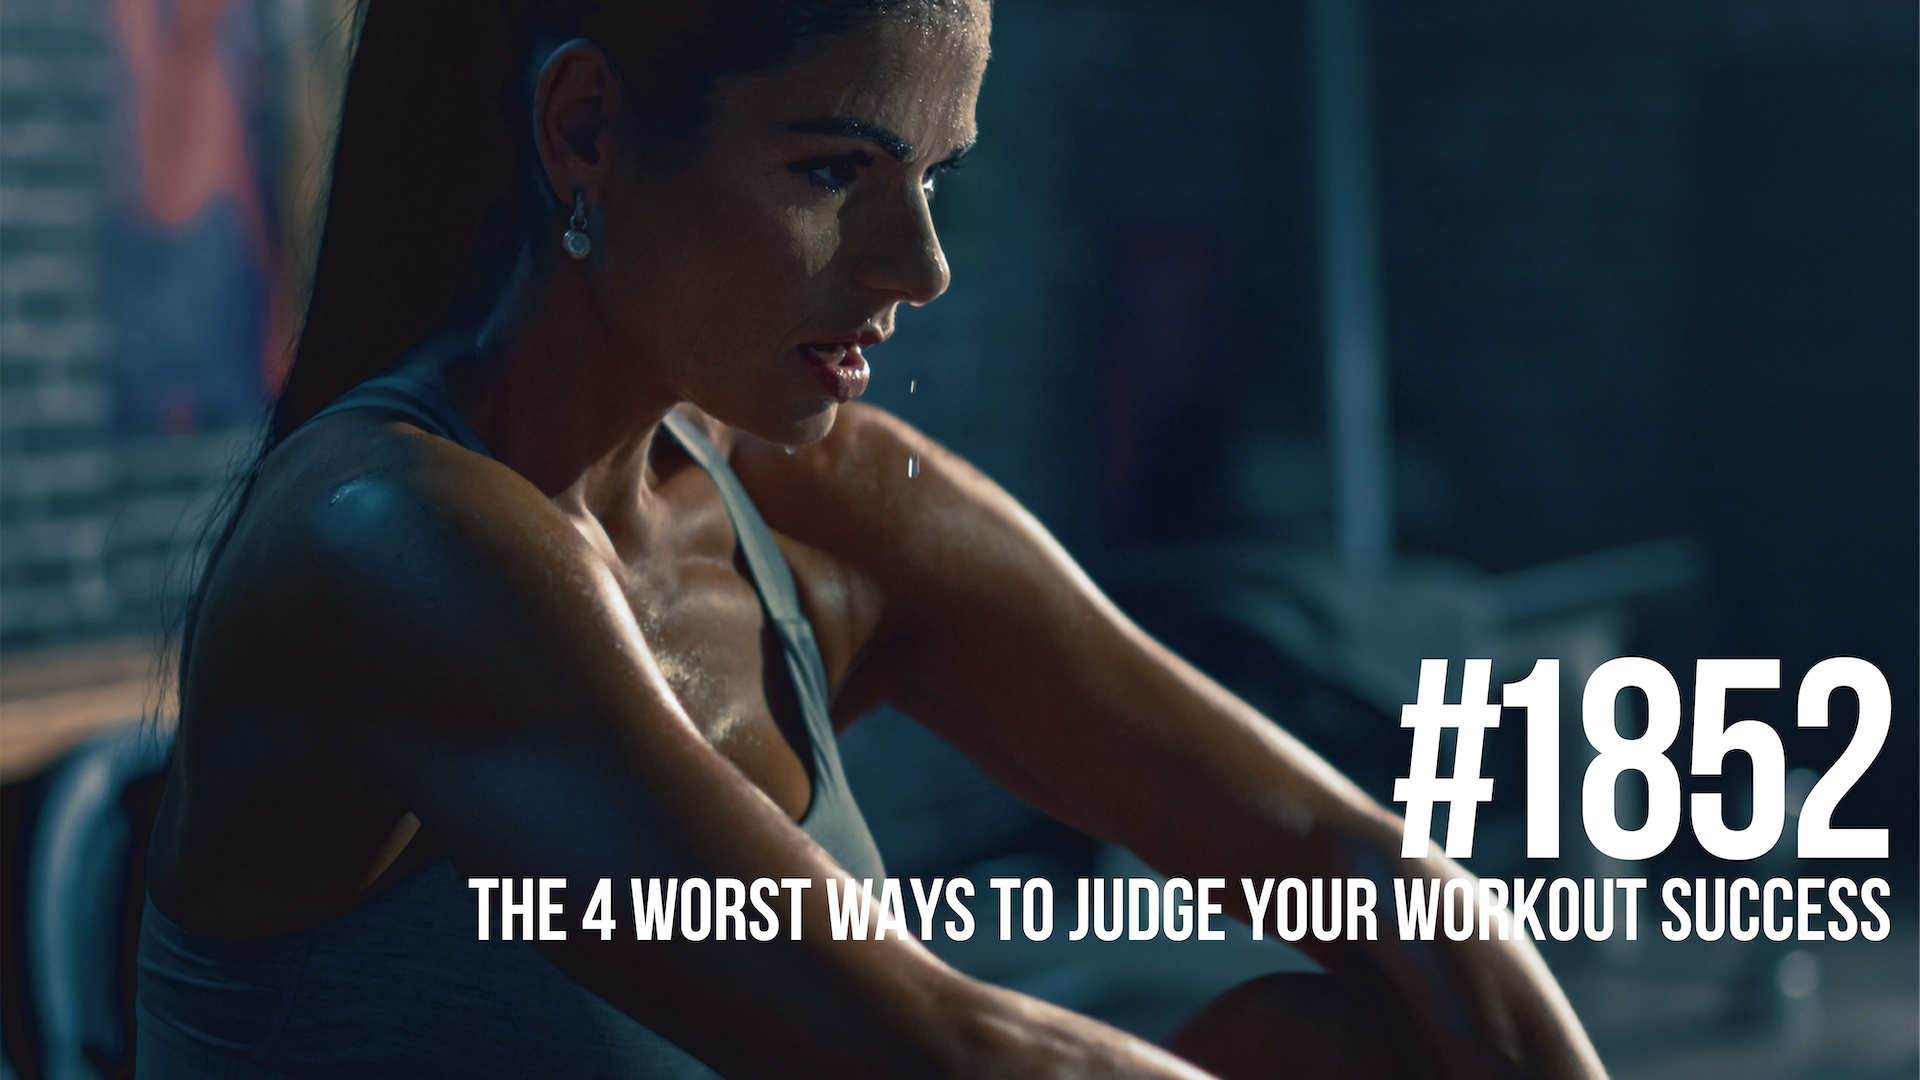 1852: The 4 Worst Ways to Judge Your Workout Success